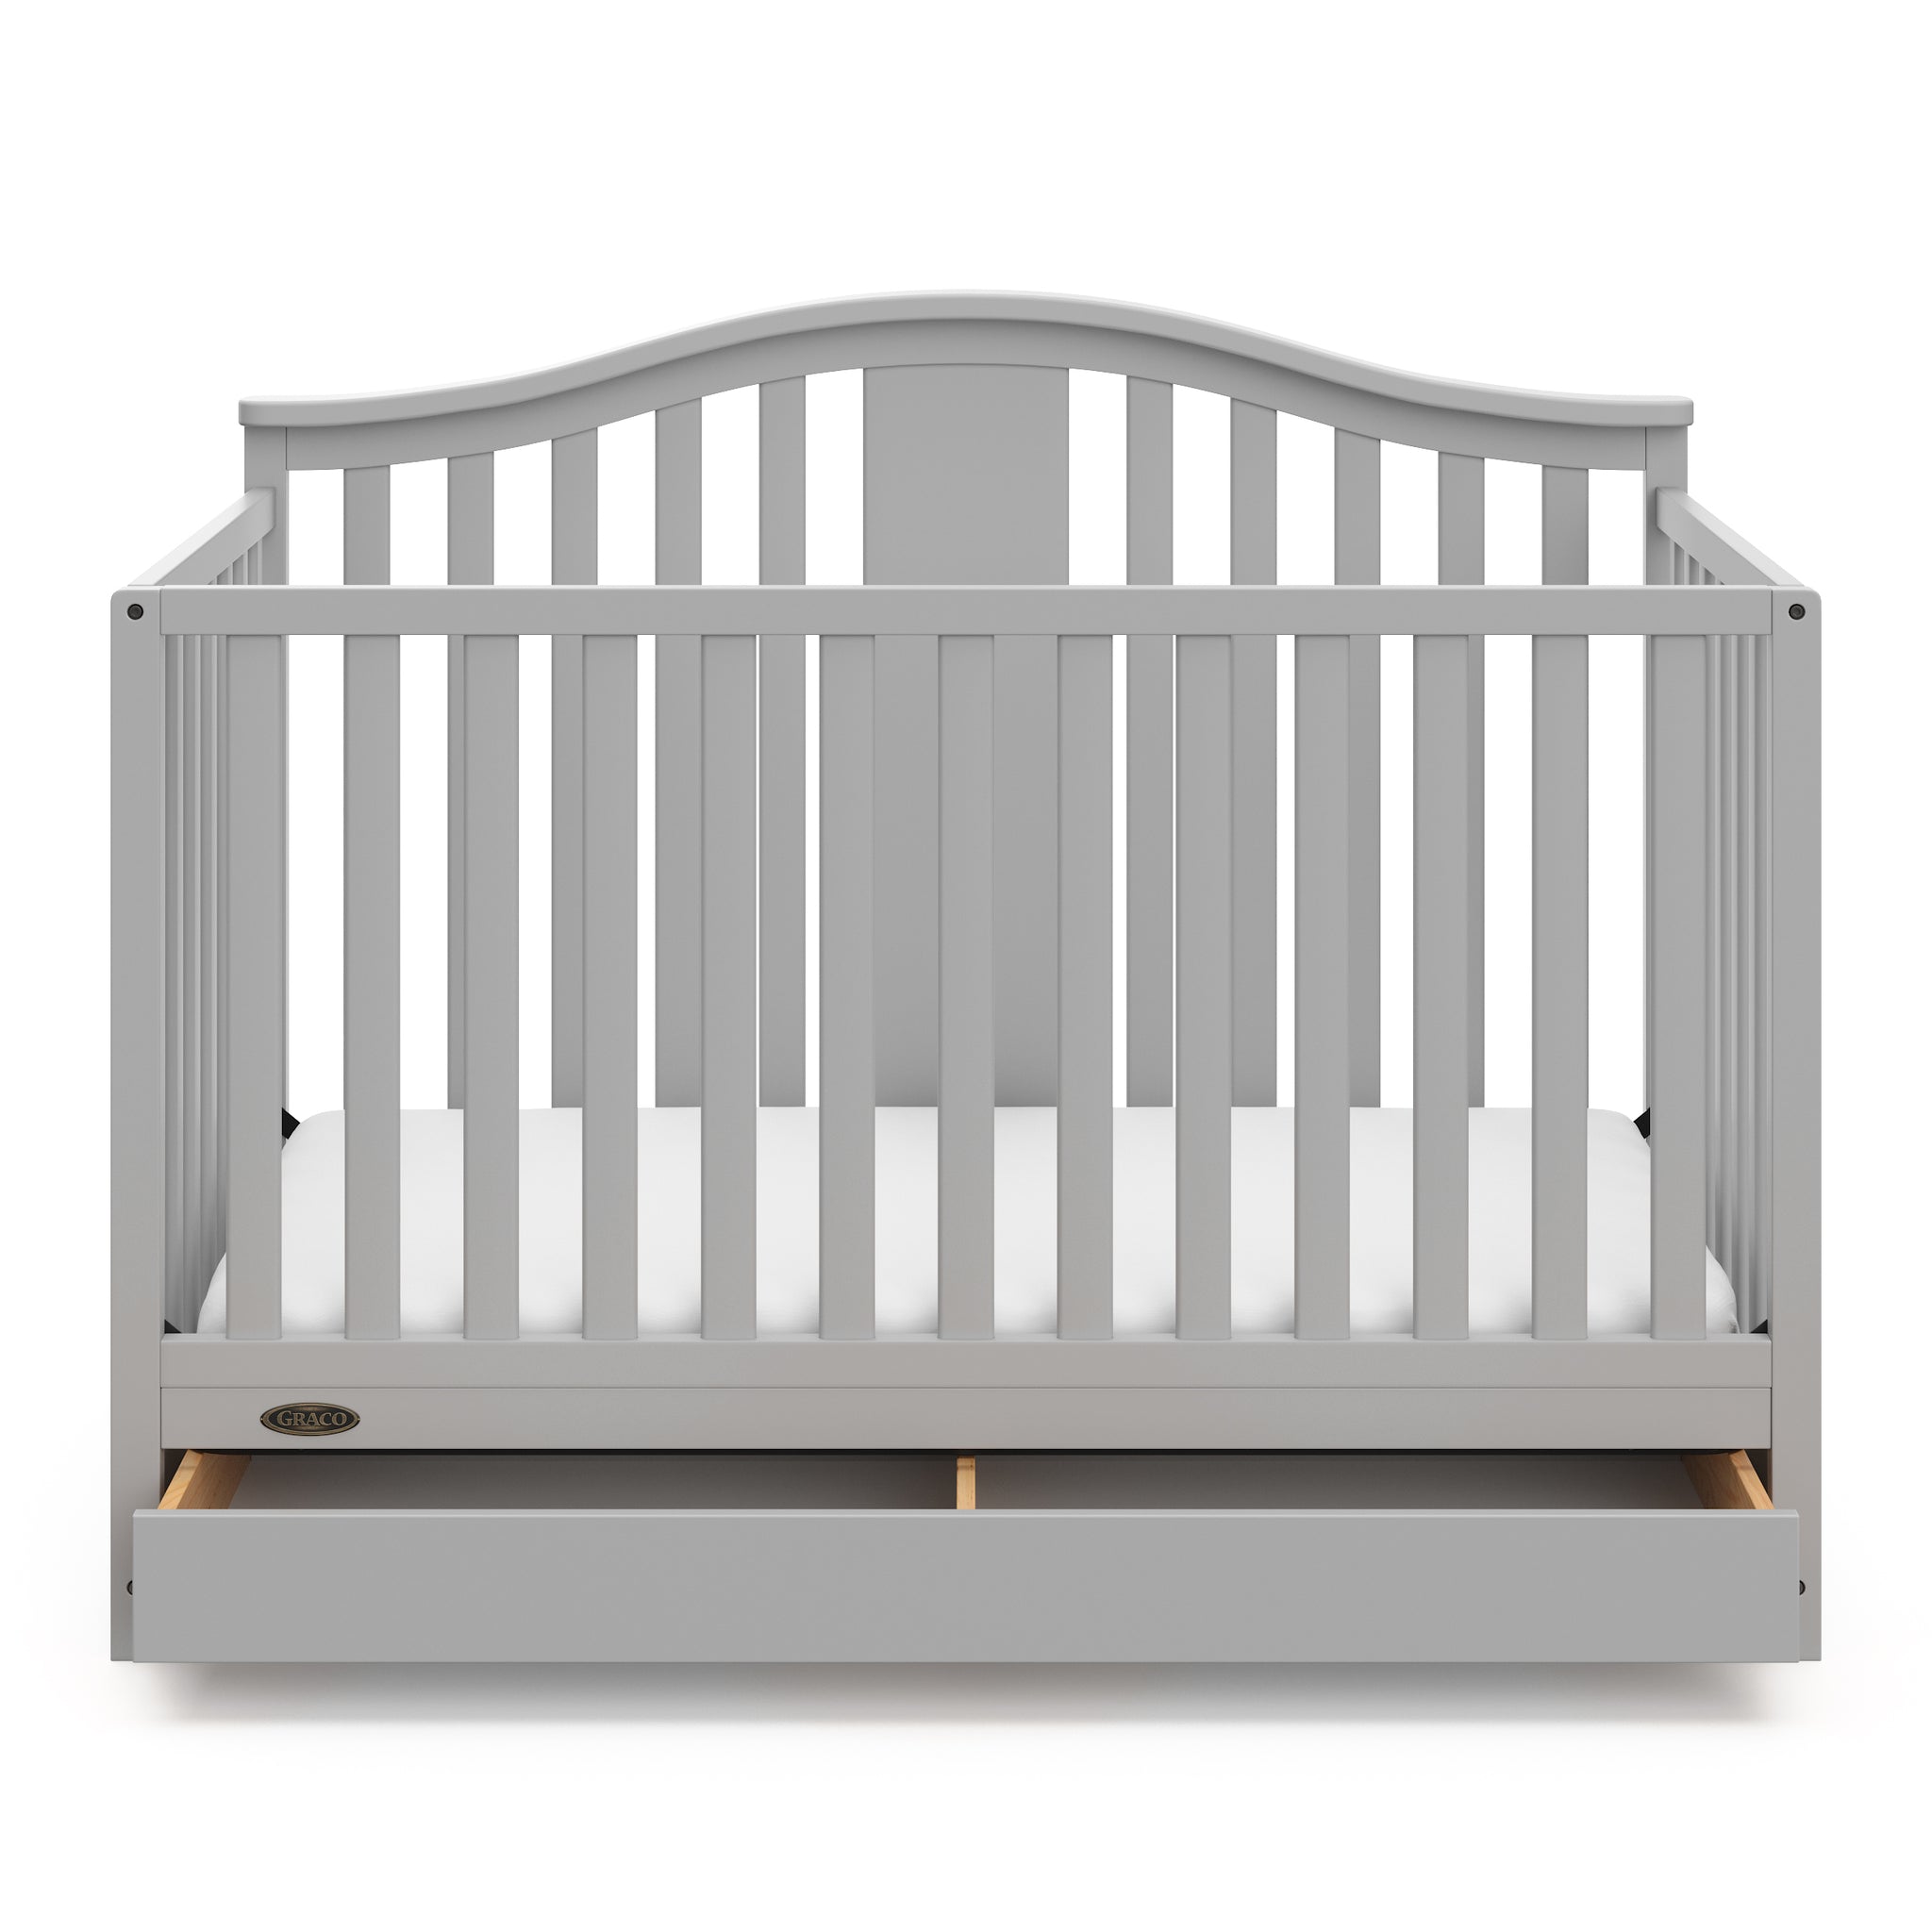 Pebble gray crib with open drawer angled